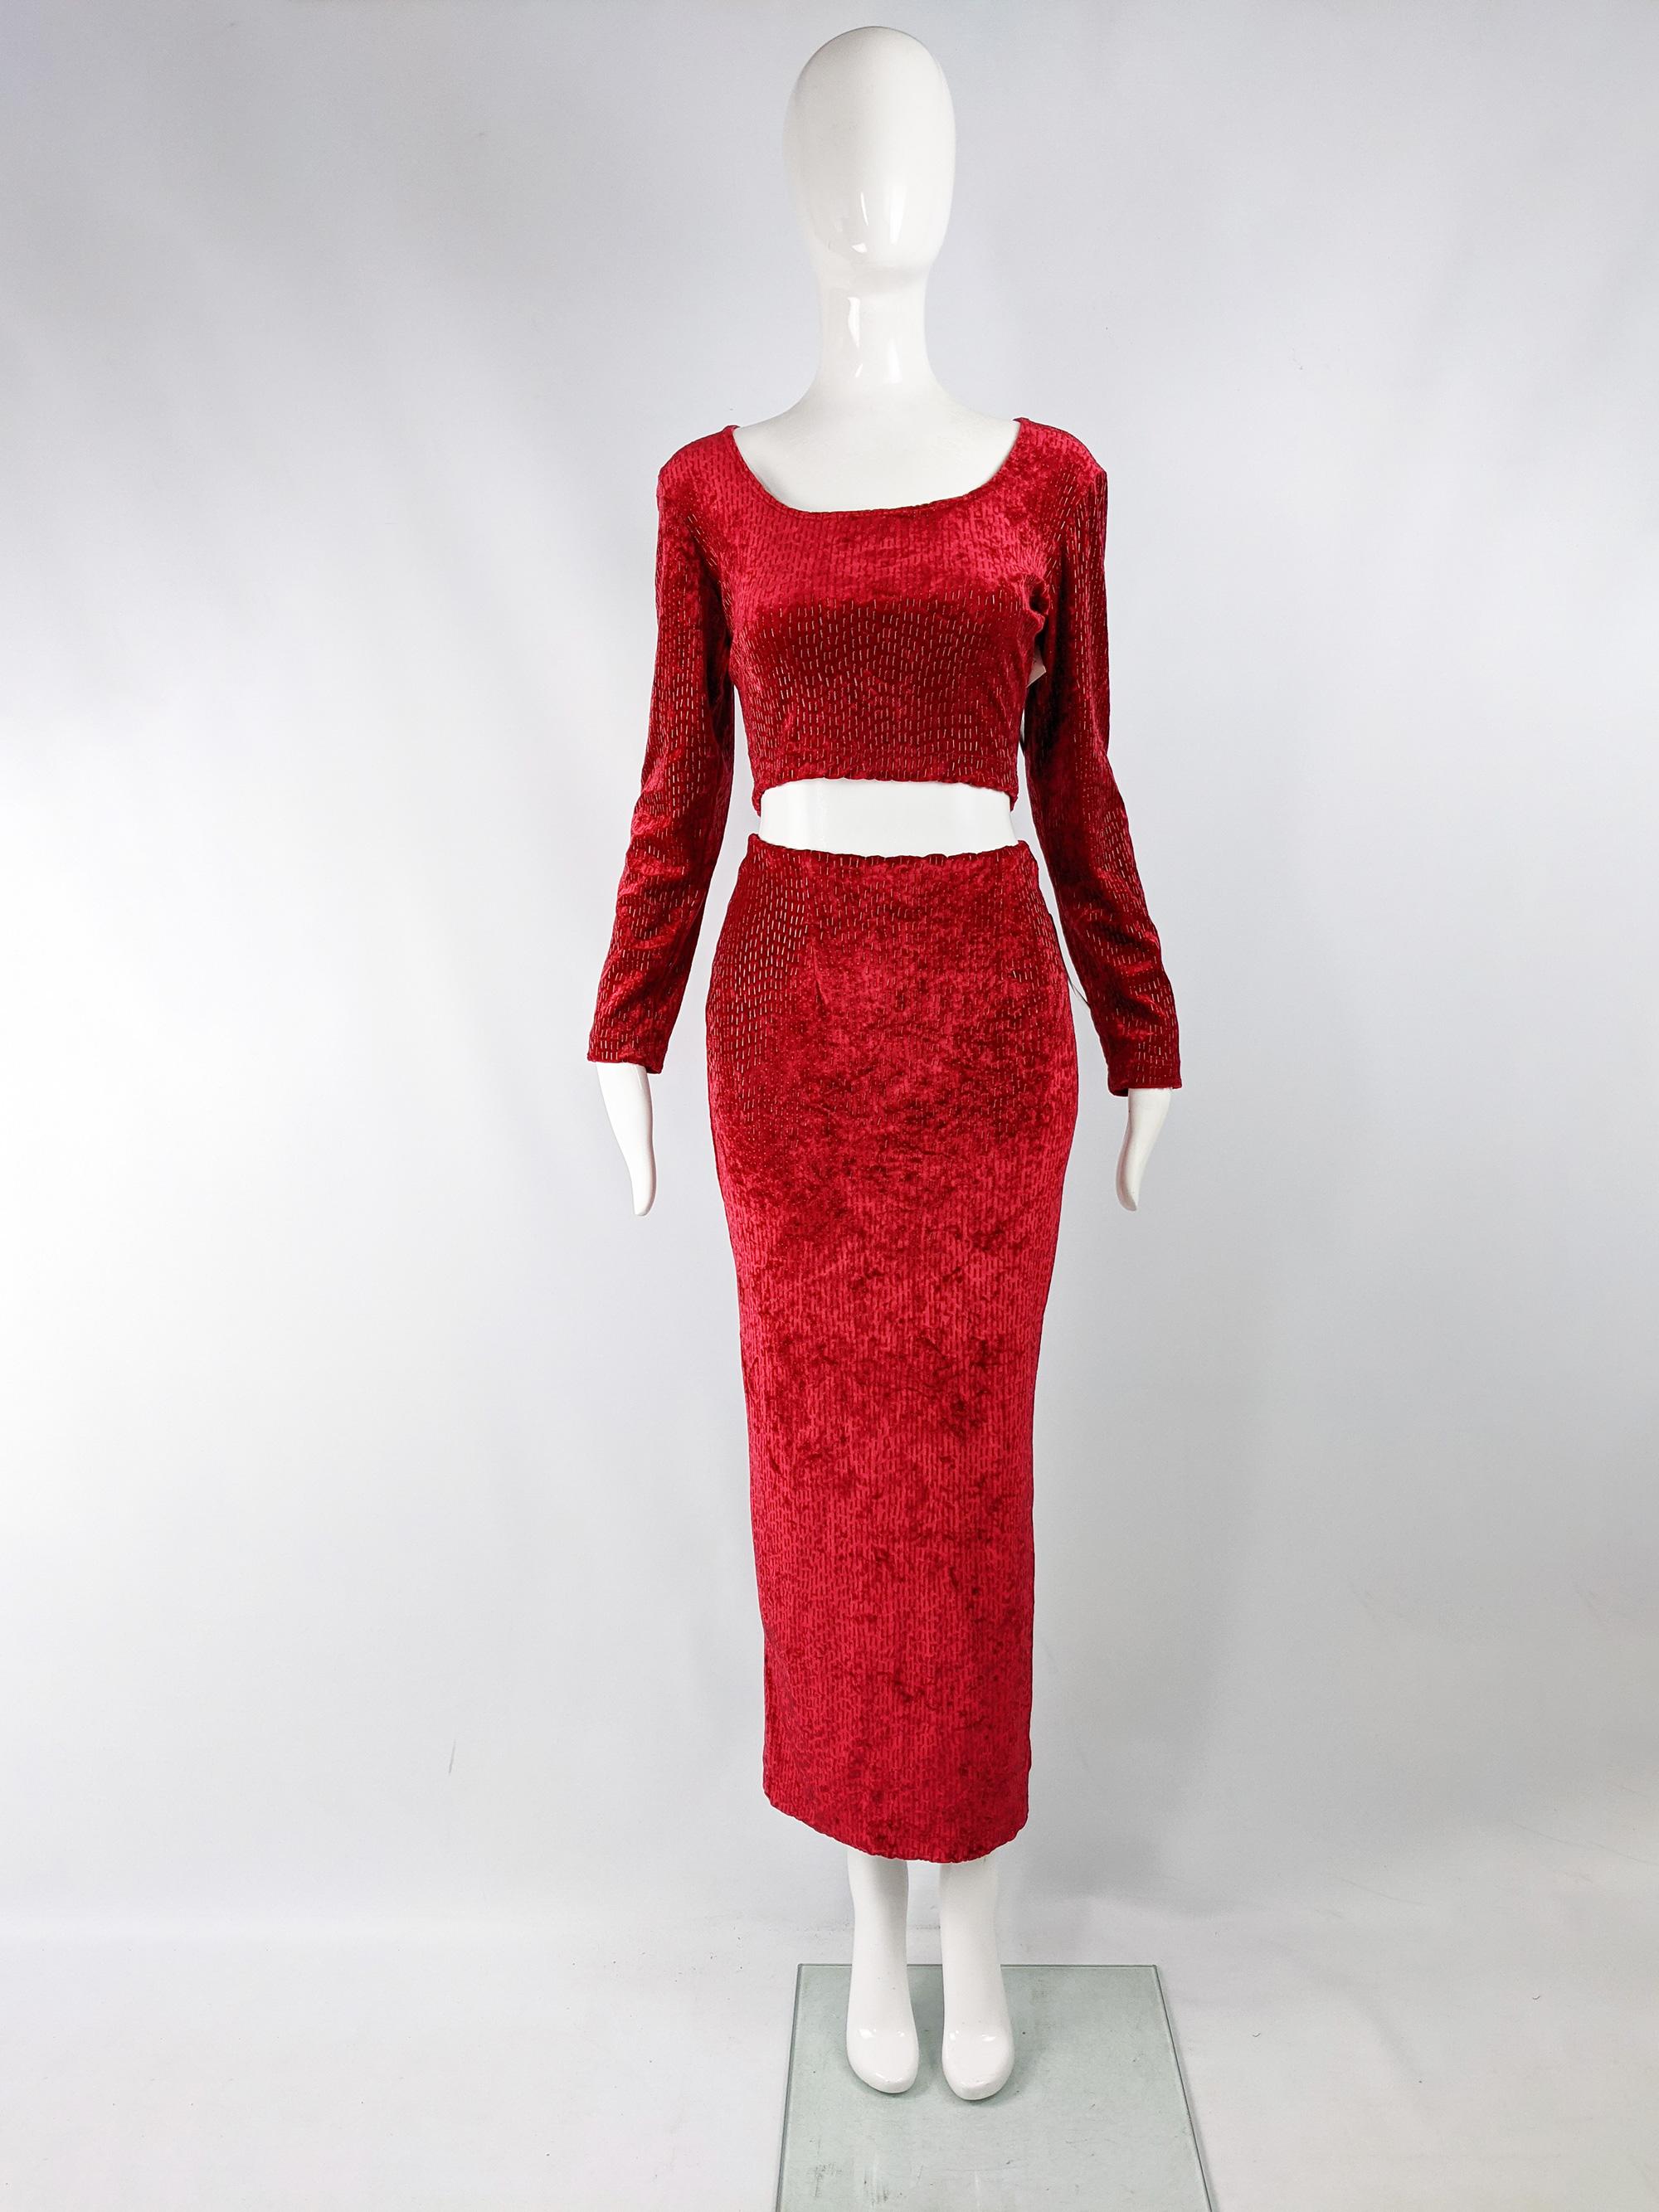 A fabulous vintage womens two piece skirt and long sleeve crop top outfit from the 90s by cult British fashion designer, Shirley Wong. In a red velour / stretch velvet with a futuristic textured effect throughout.

Size: Top Marked M, Skirt Marked S